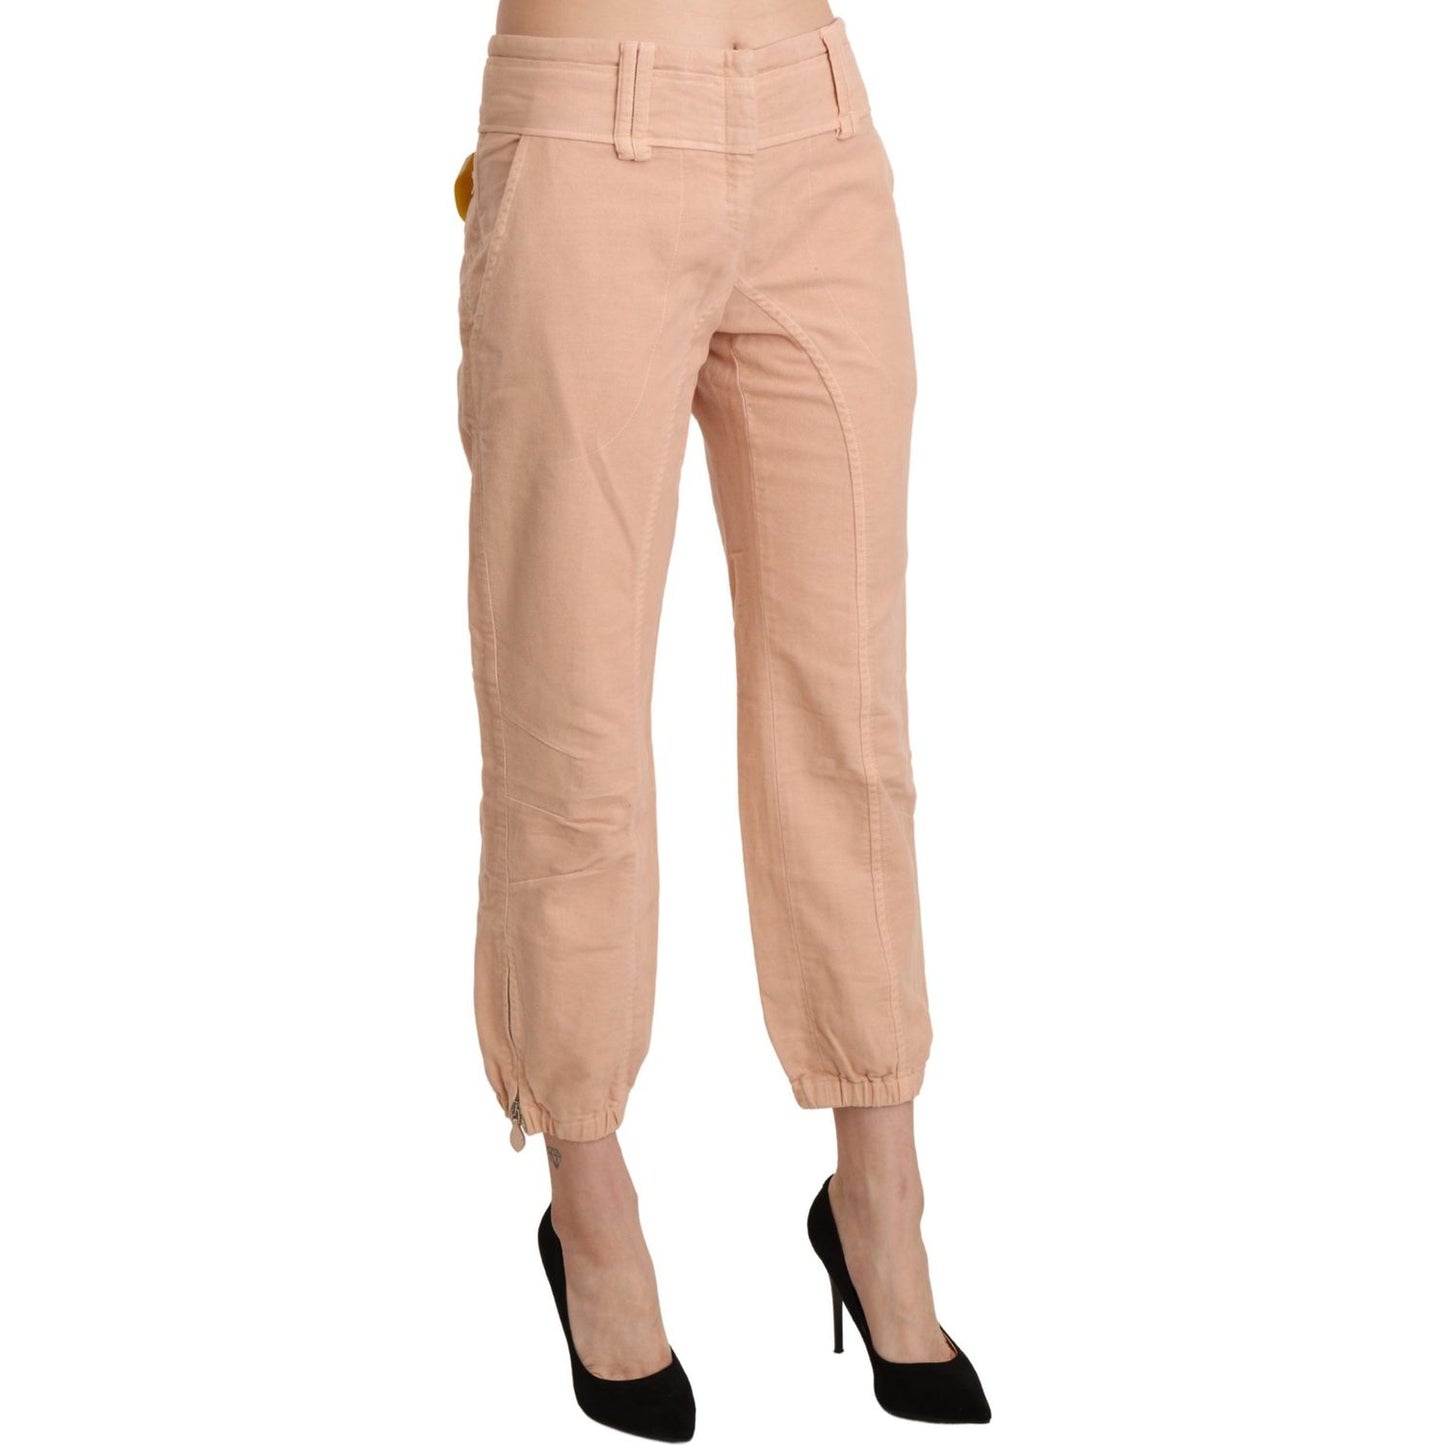 Ermanno Scervino Chic Beige Cropped Cotton Pants beige-mid-waist-cropped-cotton-trouser-pants Jeans & Pants IMG_1267-scaled-07595088-9d2.jpg